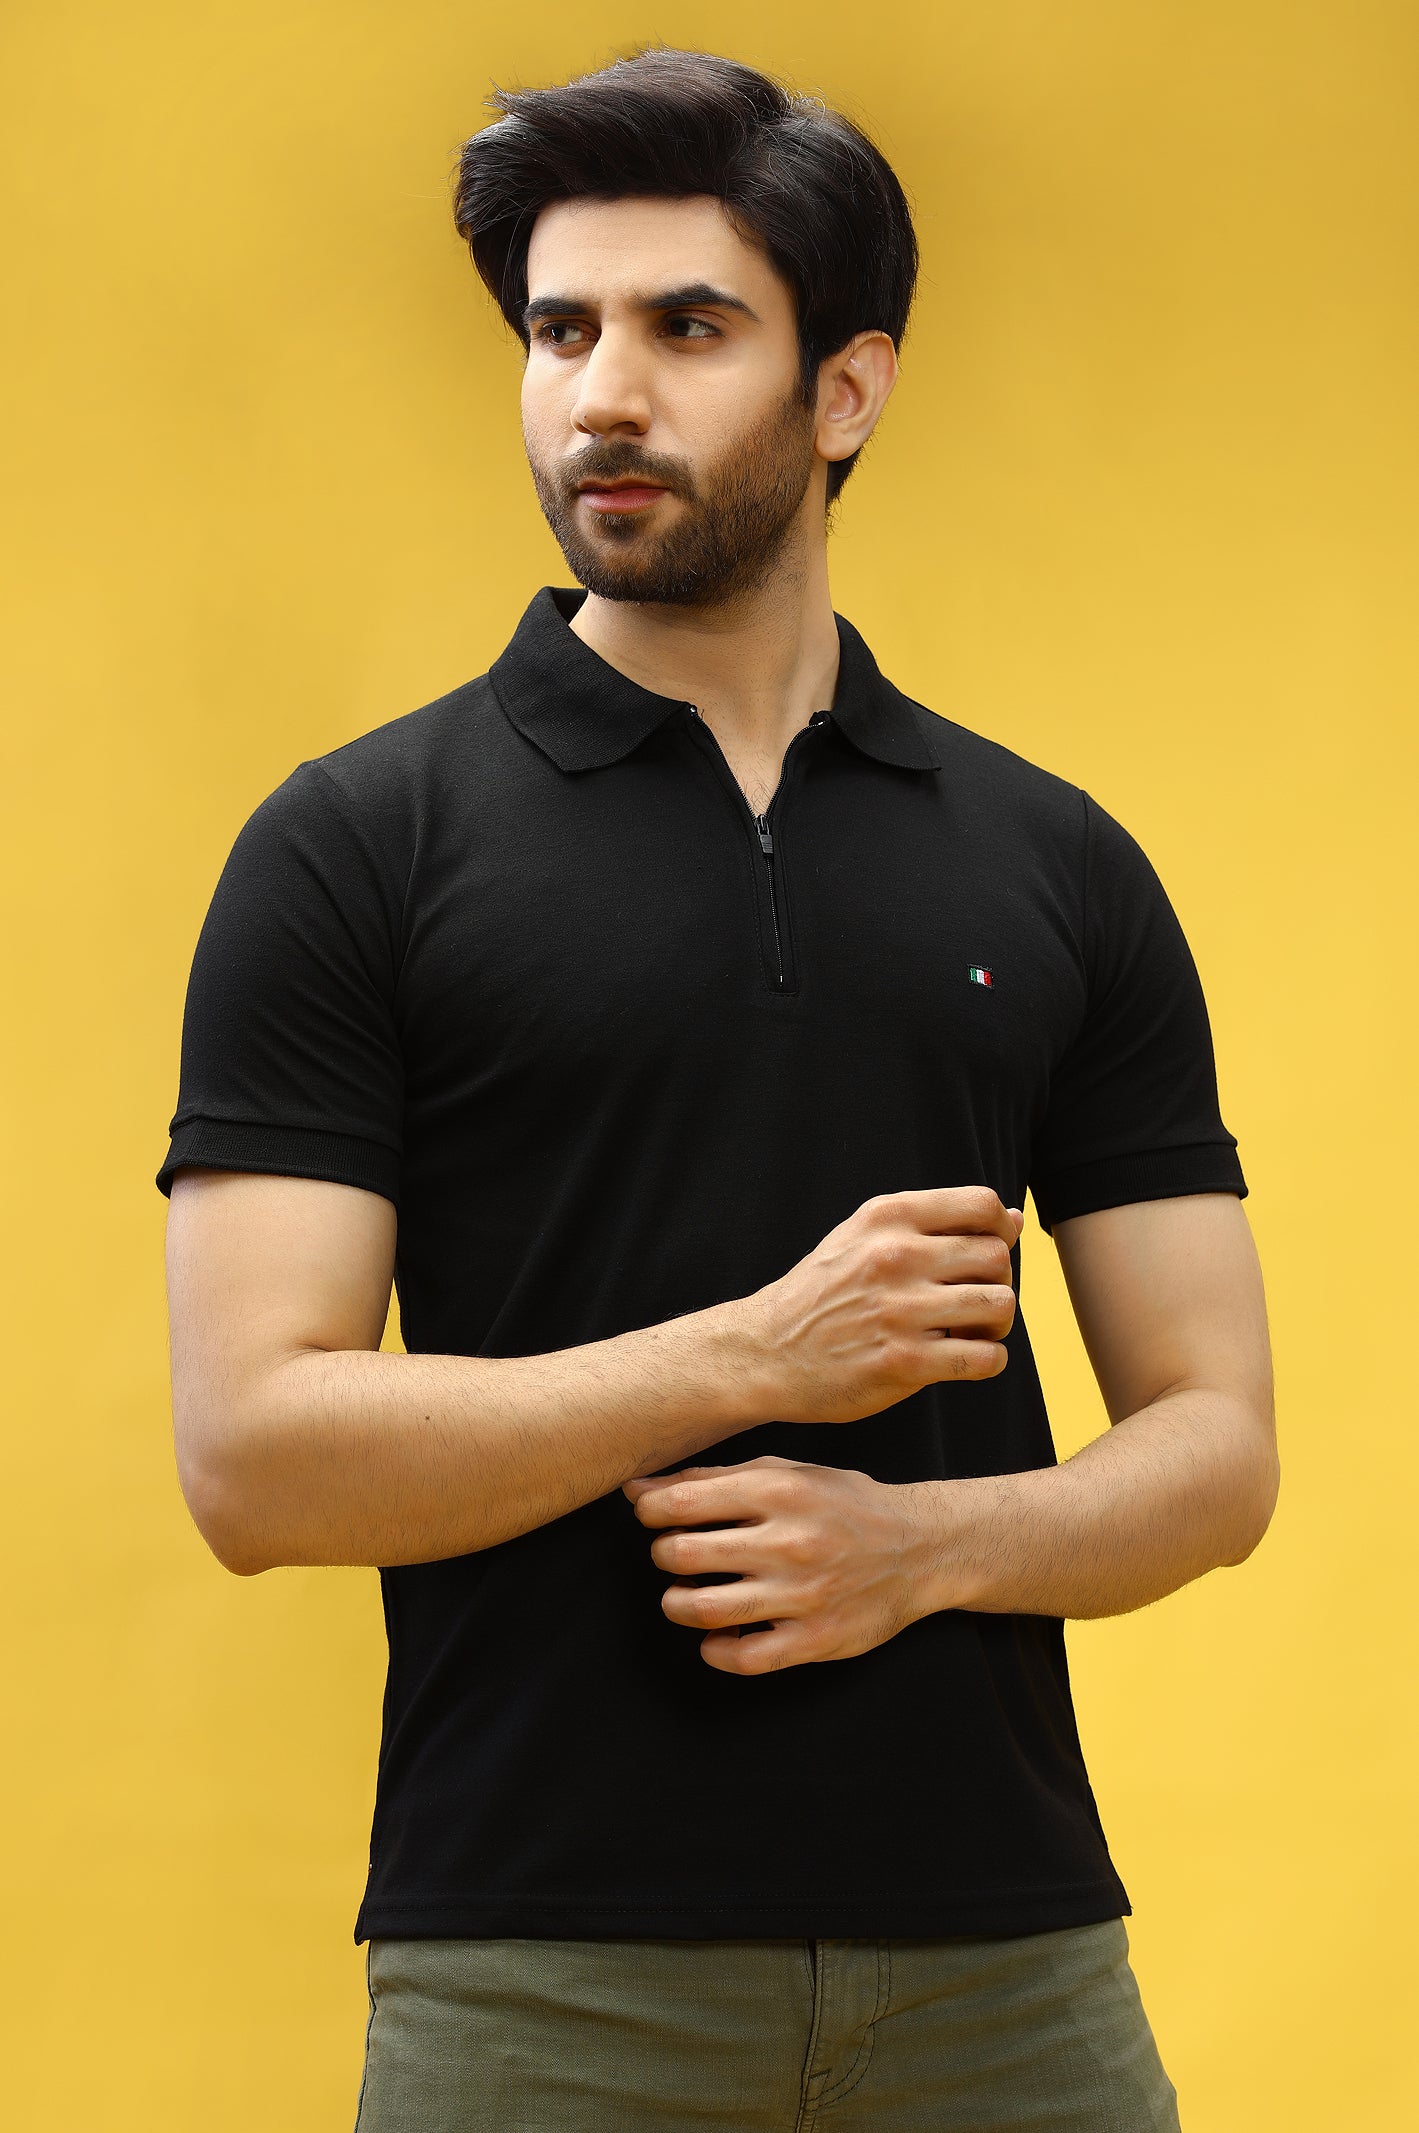 Diners Men's Polo T-Shirt - Diners